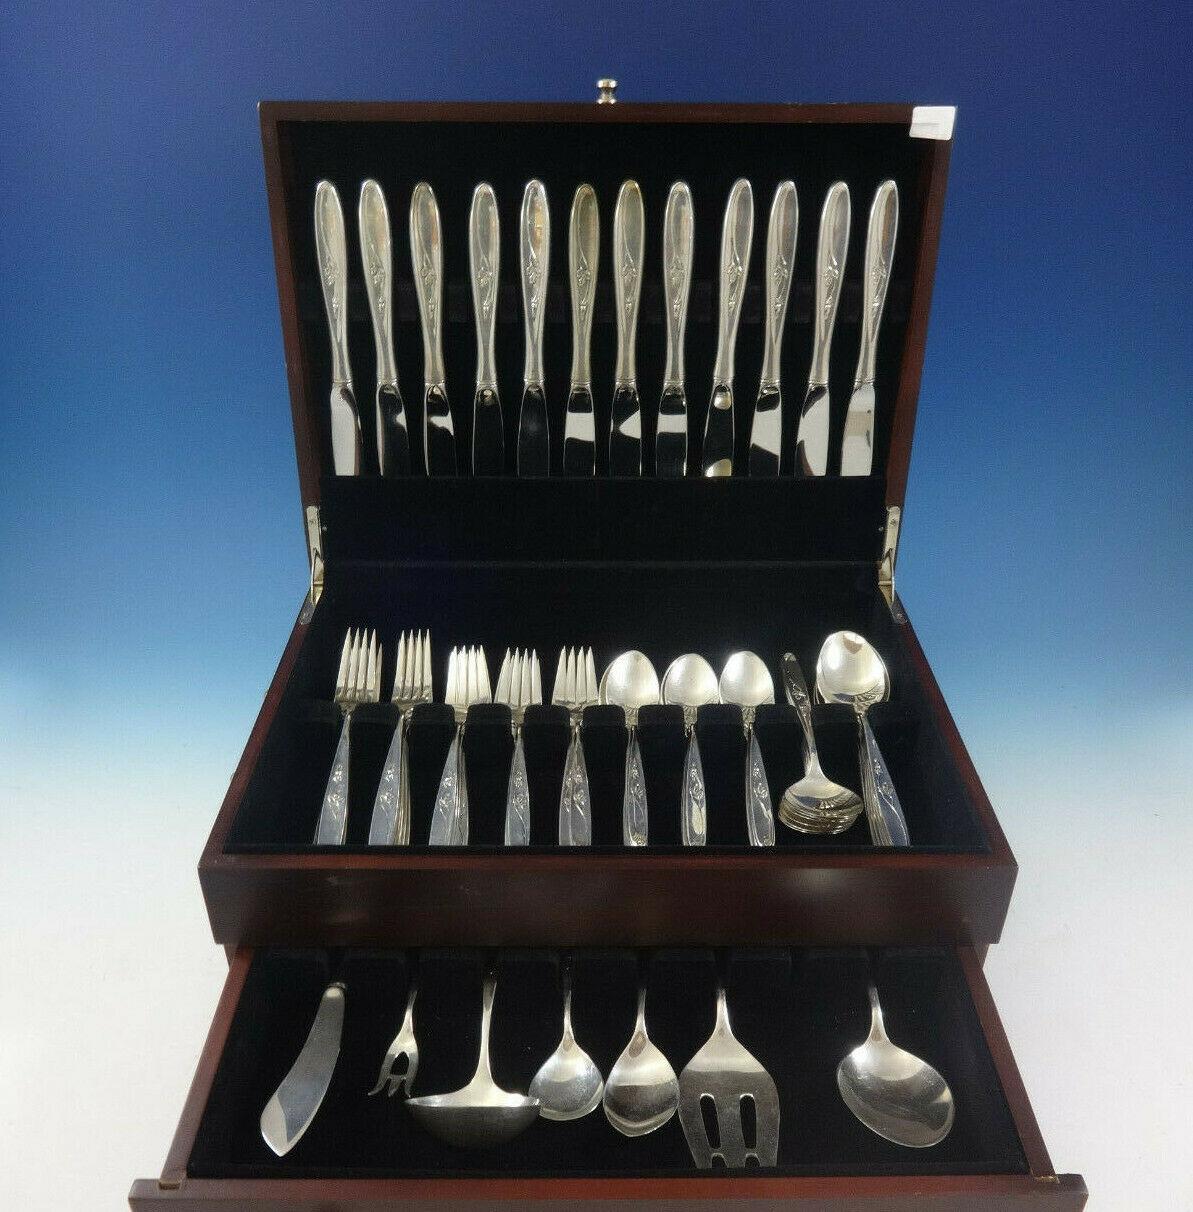 Beautiful Rose Solitaire by Towle sterling silver flatware set of 67 pieces. This set includes:

12 knives, 9